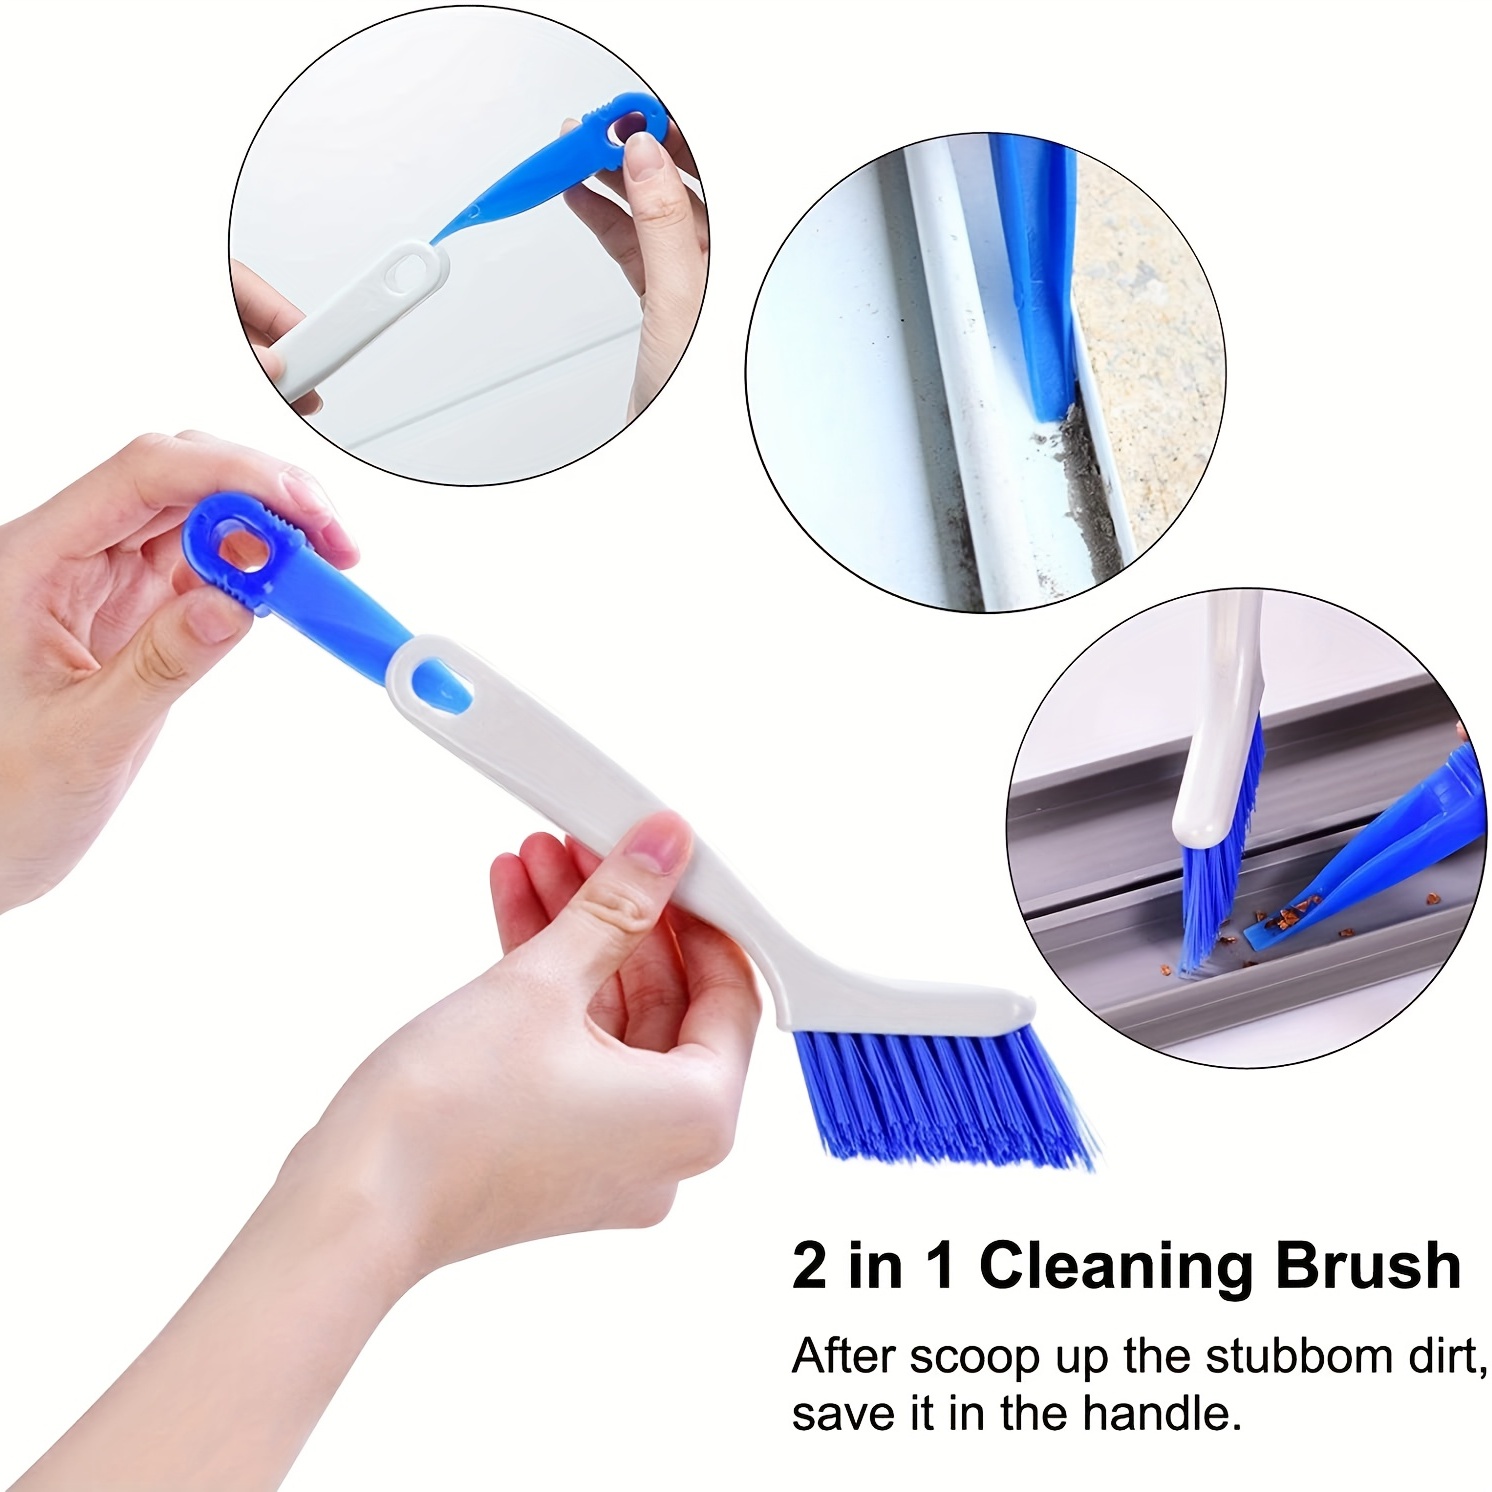 10pcs, Small Cleaning Brush For Narrow Spaces, Slot Brush, Long Handle  Crevice Brush, Detailing Brush, Groove Brush, Multifunctional Small Brush,  For